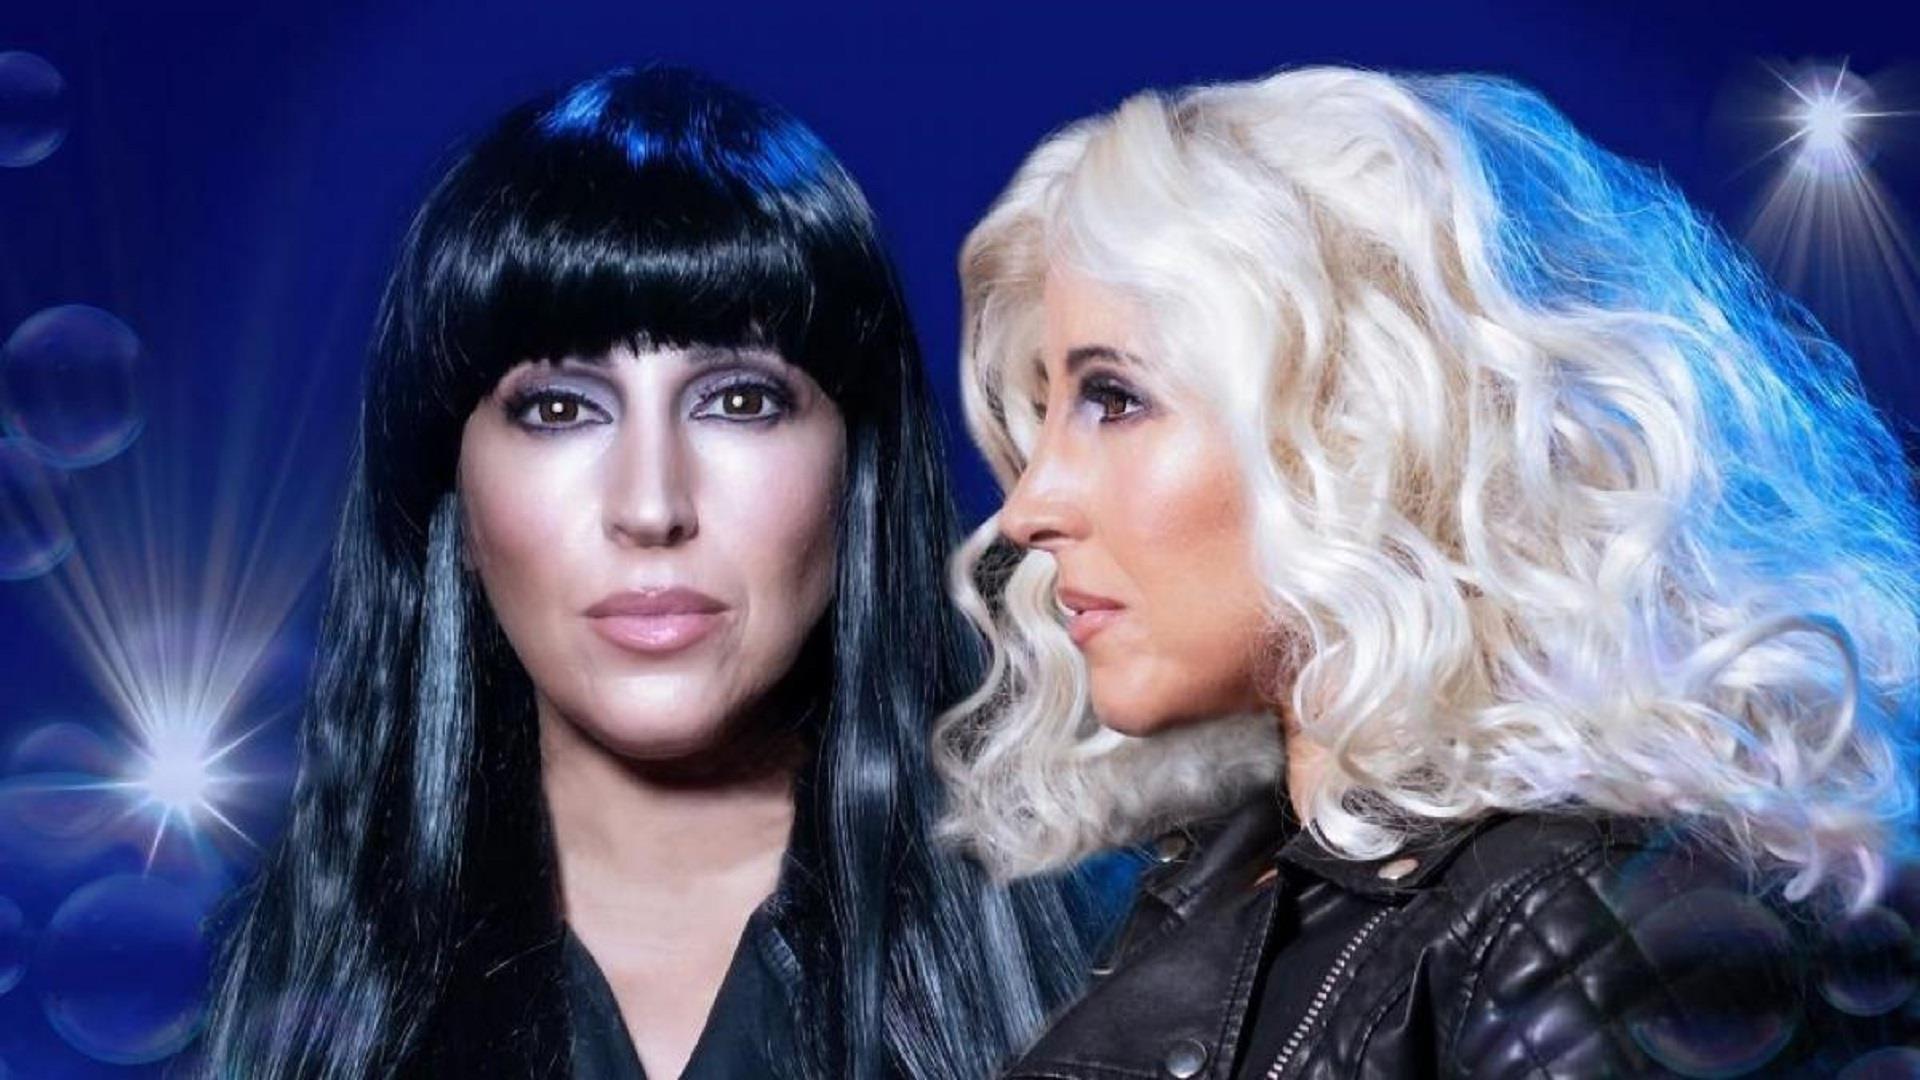 Image of Trisha McCluney as Essentially Cher. Two versions of Trisha as Cher, one with Cher's long dark hair and the other a side view of Cher with pl